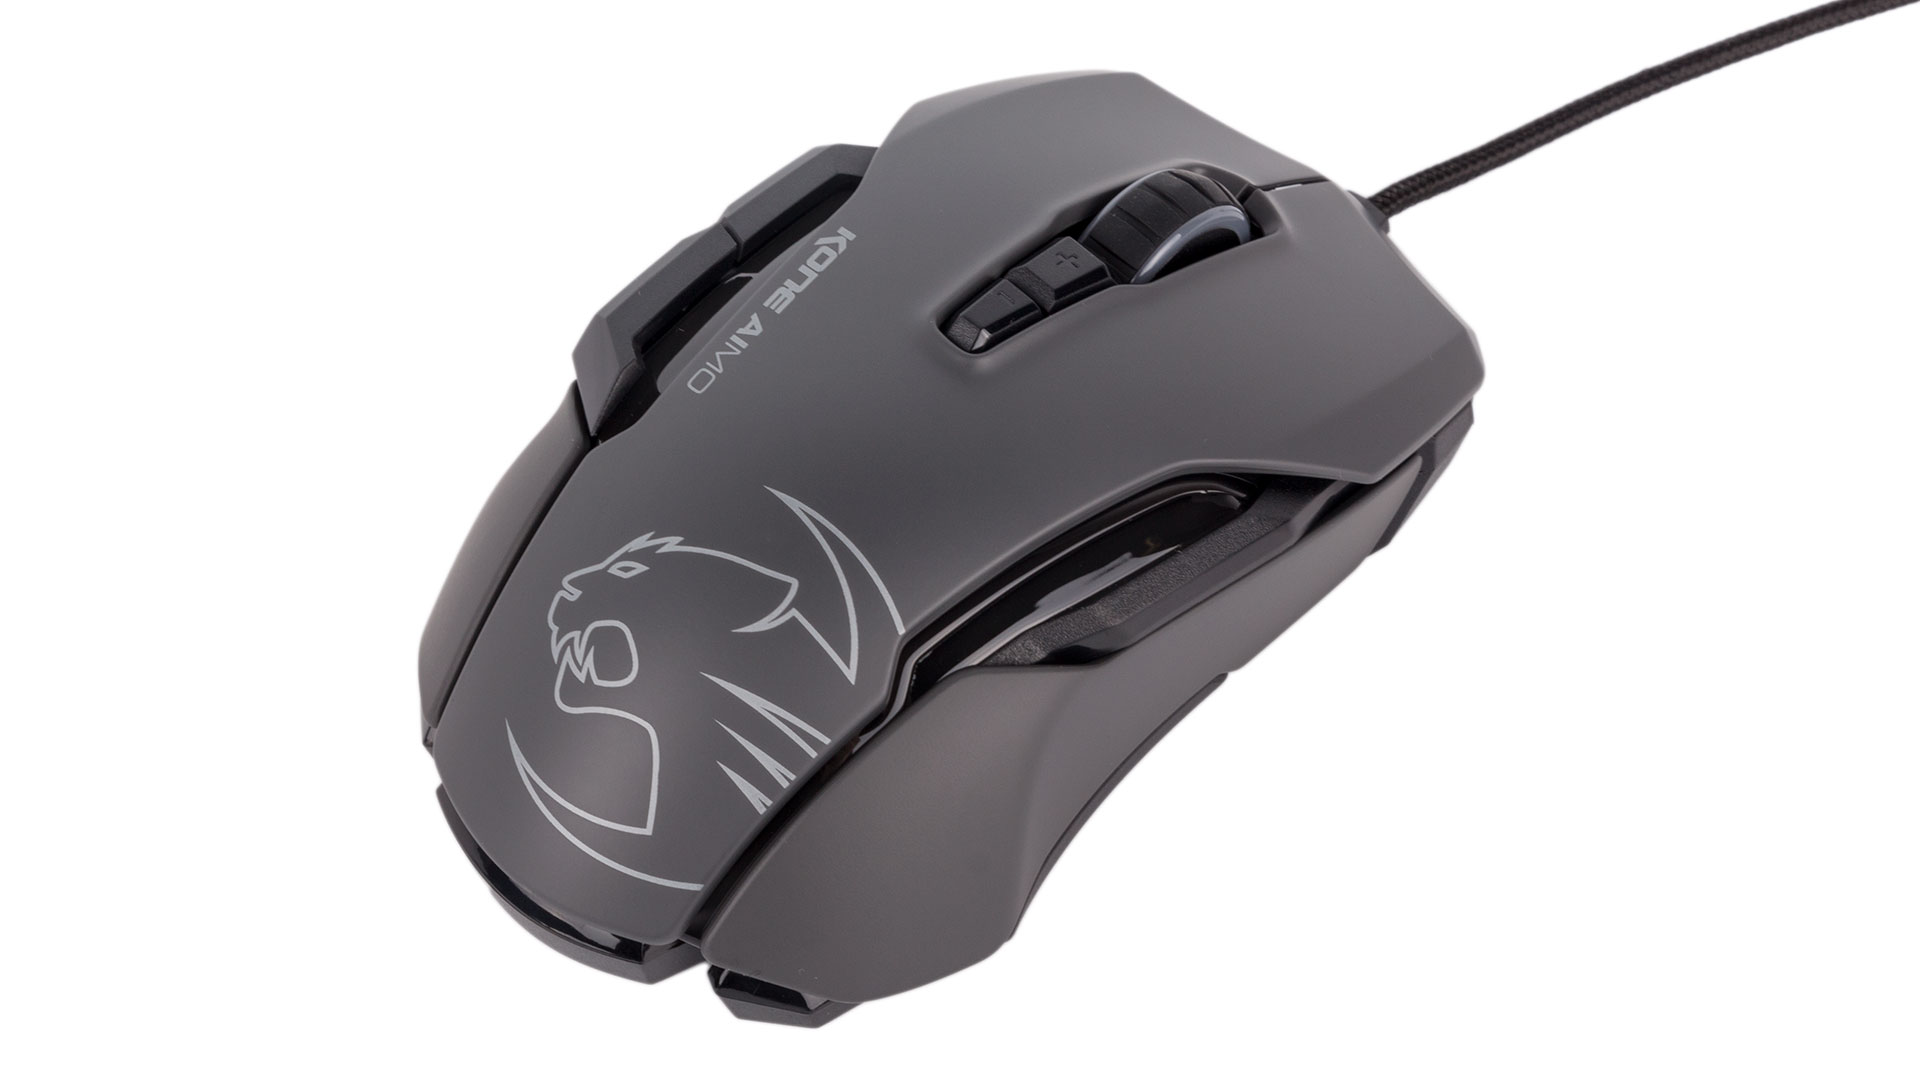 Kone Aimo Software Roccat Kone Aimo Optical Gaming Mouse White Deals Pc World Roccat S New Kone Aimo Gaming Mouse Is The Start Of A Brand New Product Family